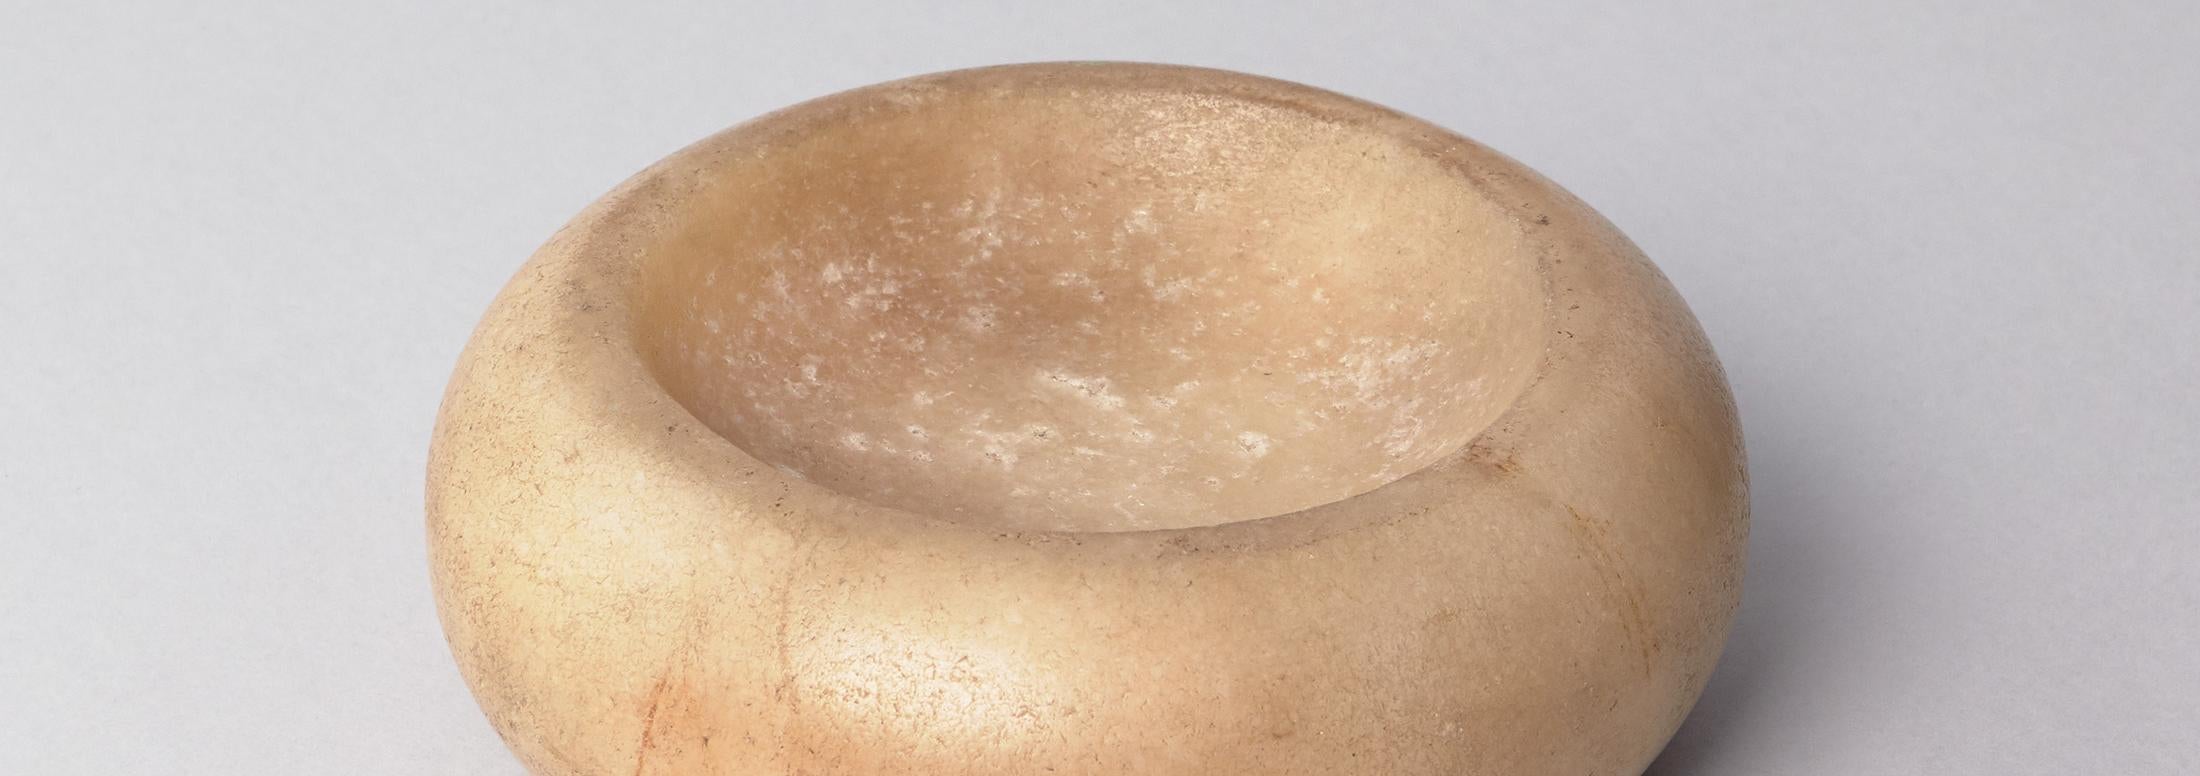 Round pale yellow or ivory colored stone disc with divet carved into the center 